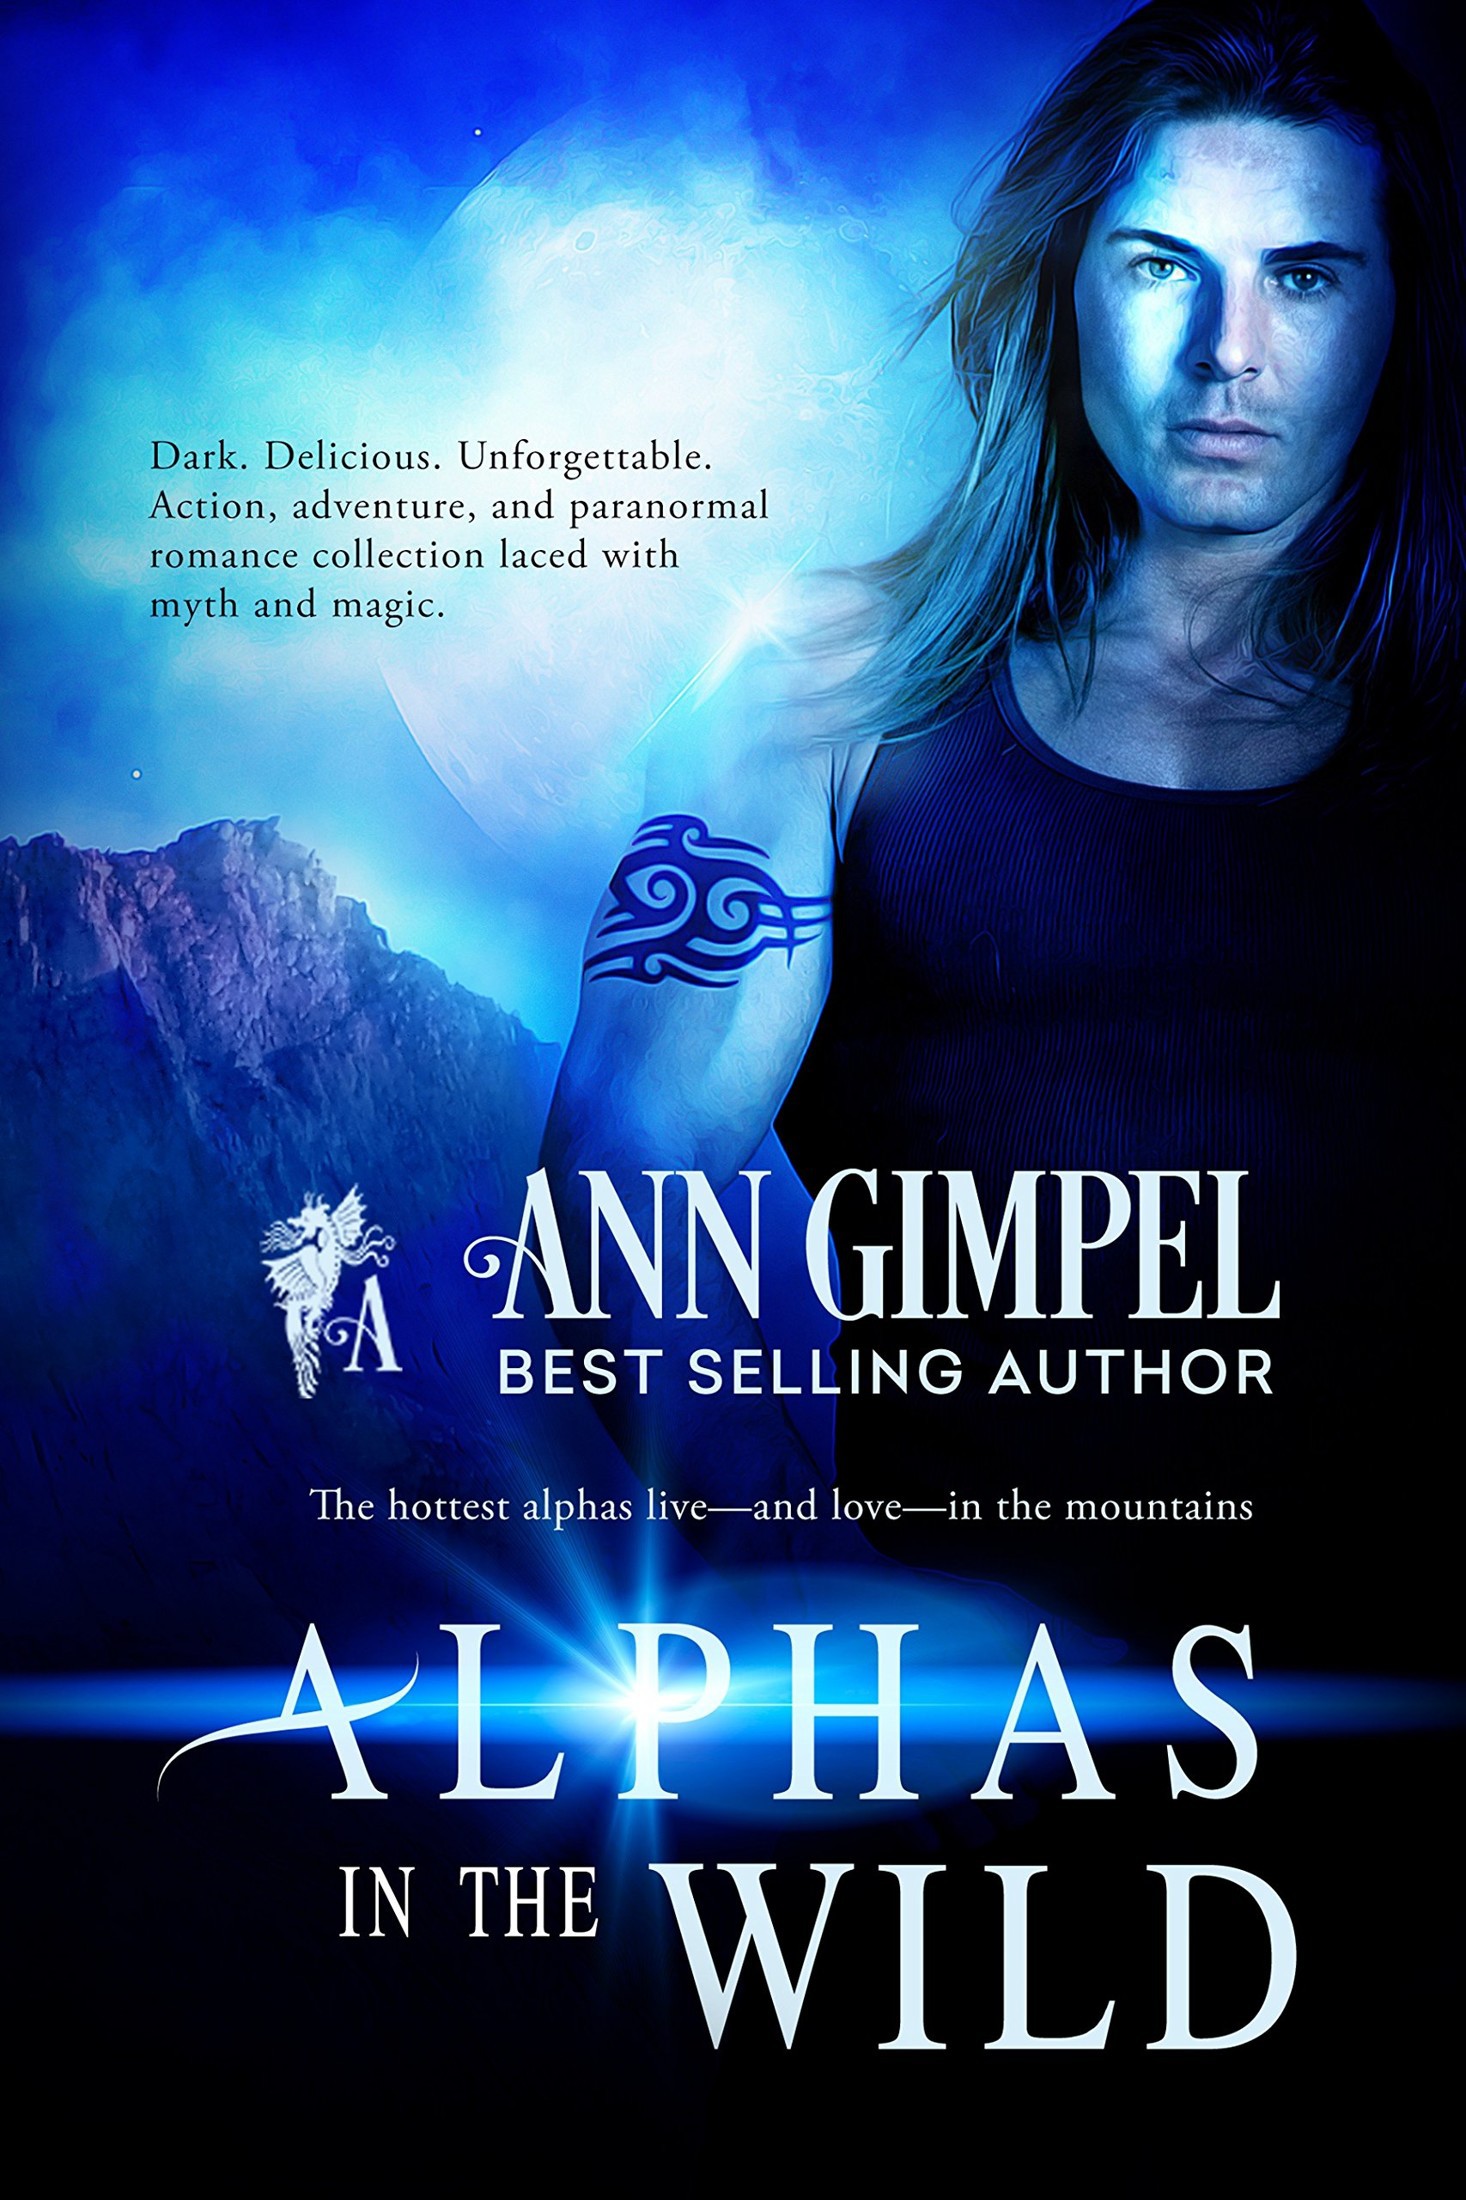 Alphas In The Wild by Ann Gimpel